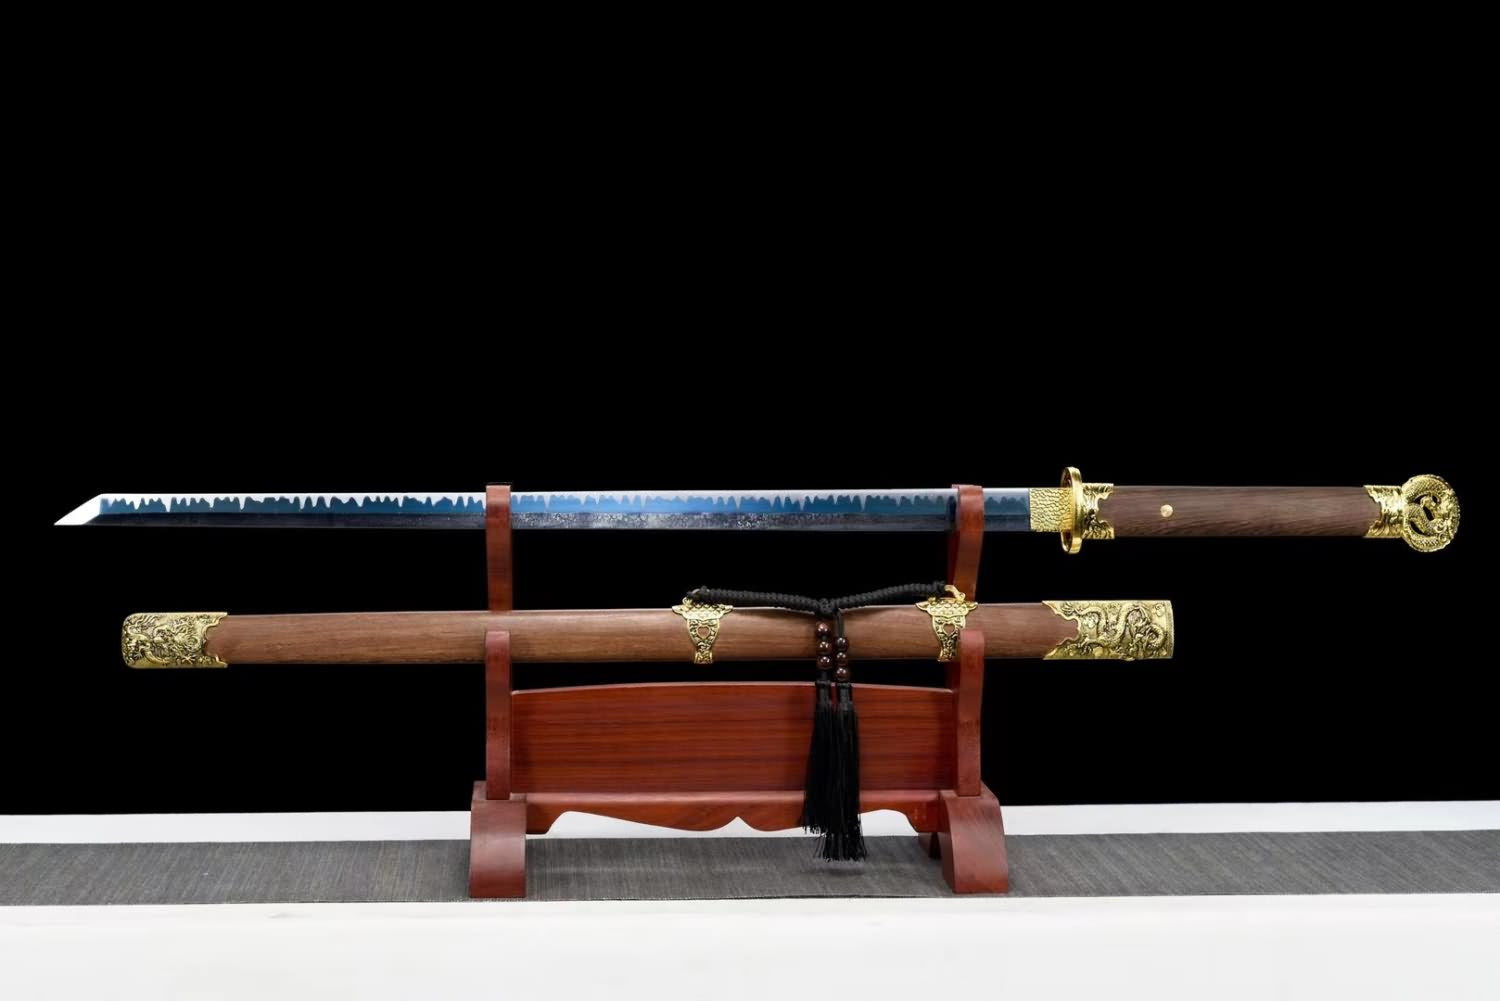 Chinese sword,Dragon Tang dao Forged high Carbon Steel Blue Blade,Alloy Fittings,Rosewood Scabbard